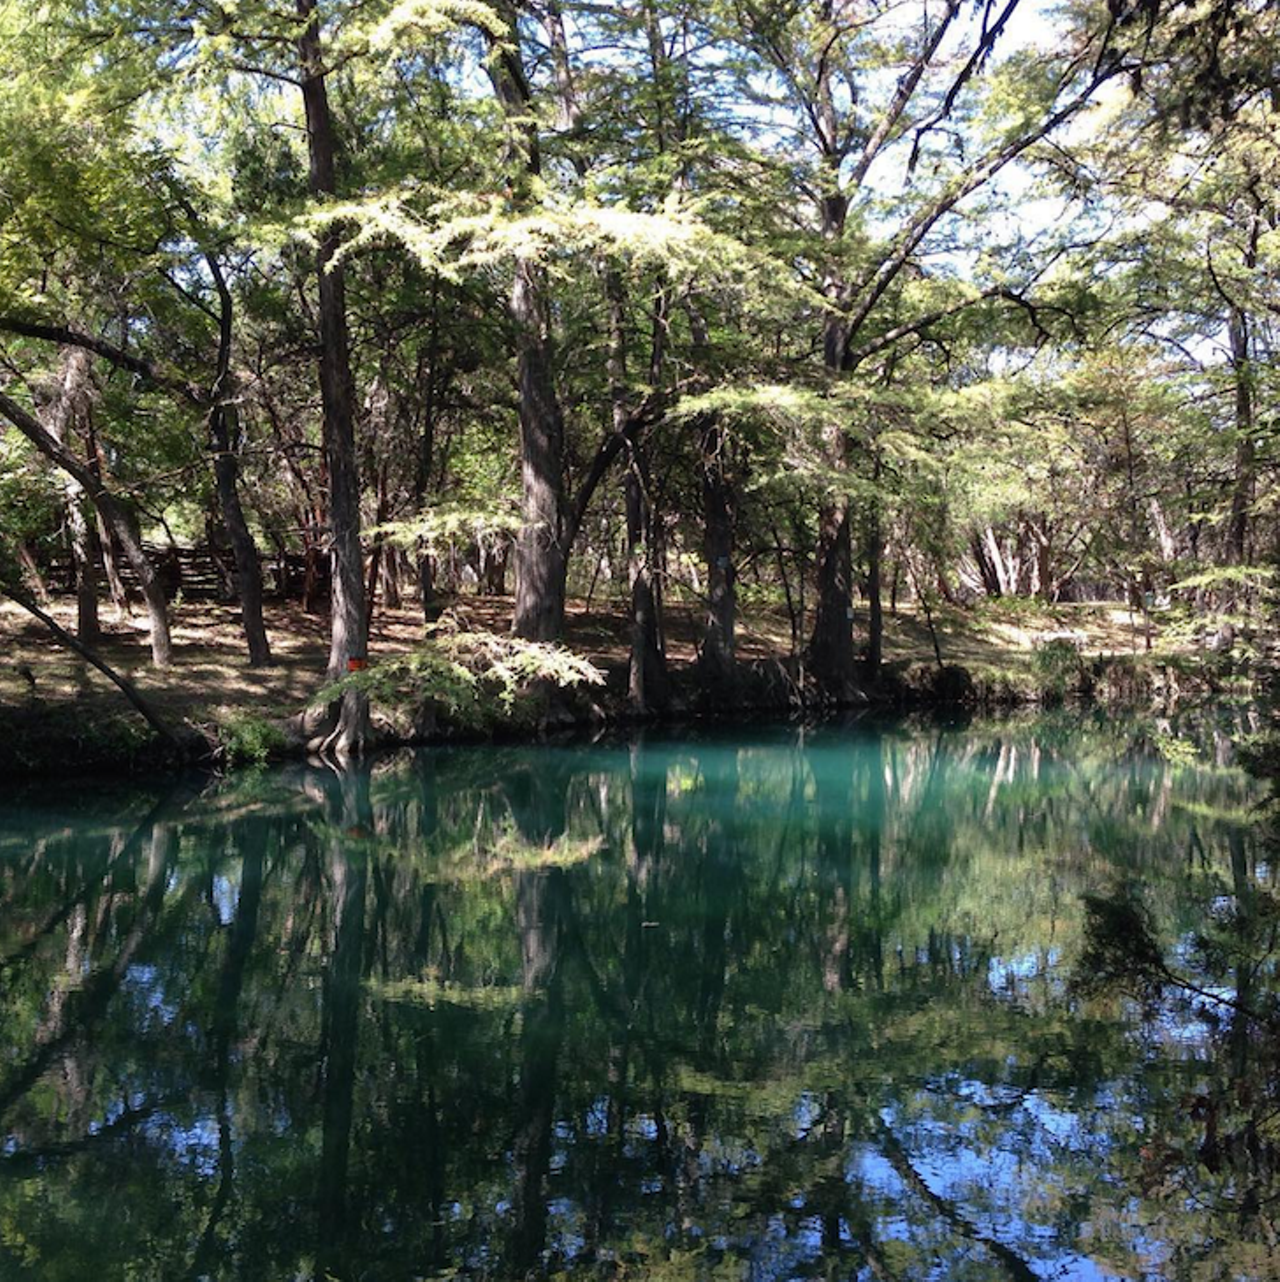 Blue Hole in Wimberley, Texas   
100 Blue Hole Road, Wimberley, Texas 78676, (512) 243-1643, tpwd.texas.gov 
You can take a dip or just bask in the shade of the old trees at this lovely swimming spot. The park even features rope swings for daring swimmers. 
Photo via Instagram (shoot_for_the_chars)